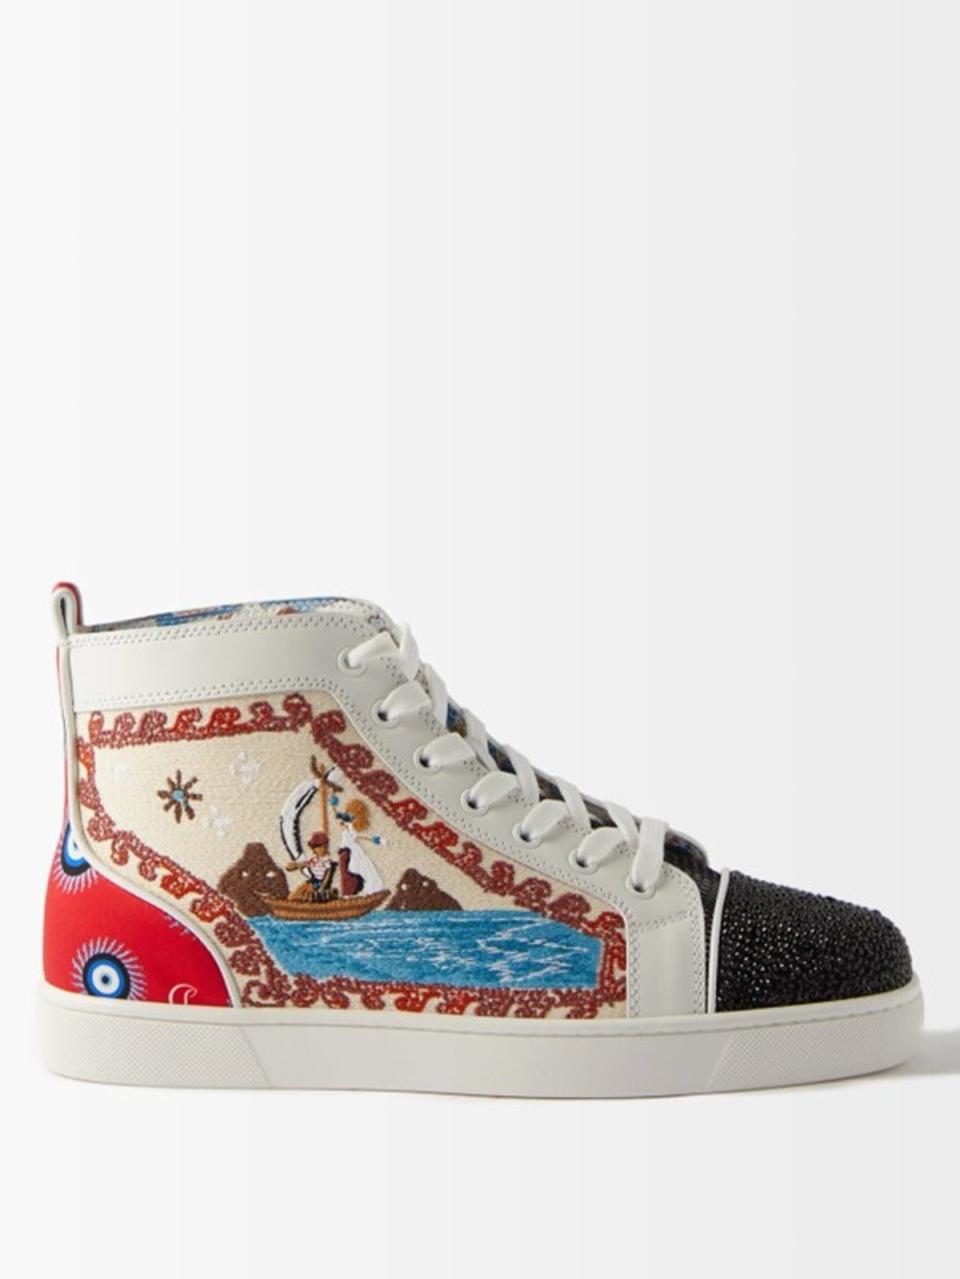 Christian Louboutin, No Limit boat-embroidered leather trainers, £1,895, matchesfashion.com (Matches)